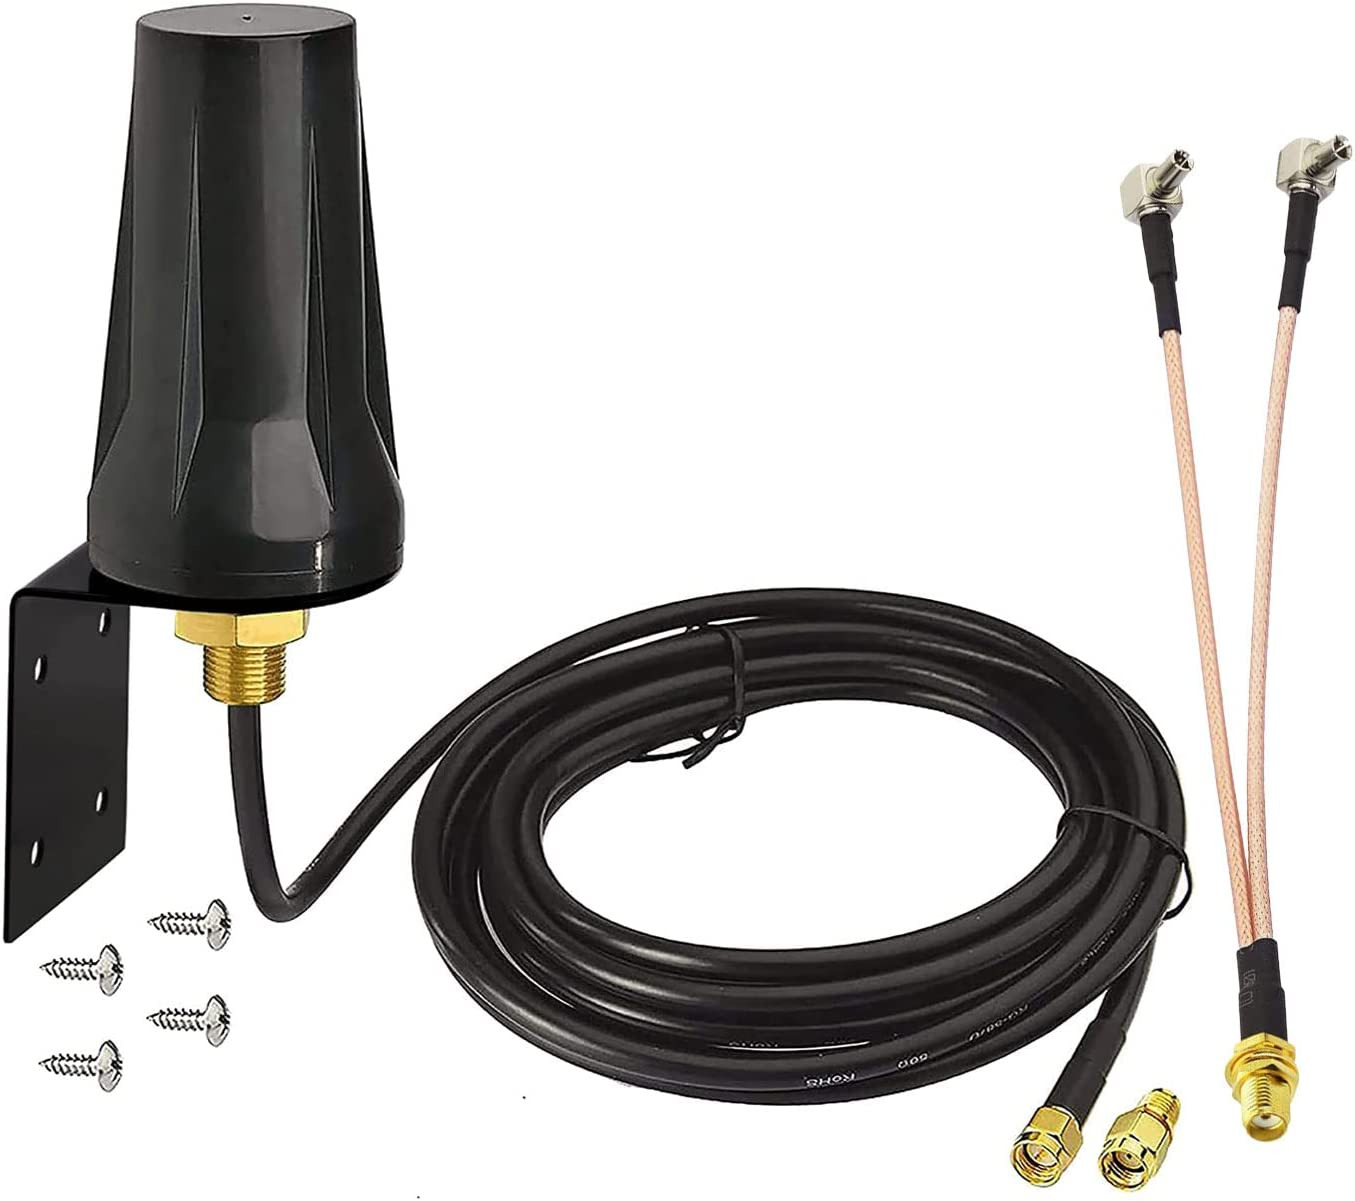 Cellular 4G LTE SMA Antenna - with TS9 Splitter Cable - Compatible with Verizon 